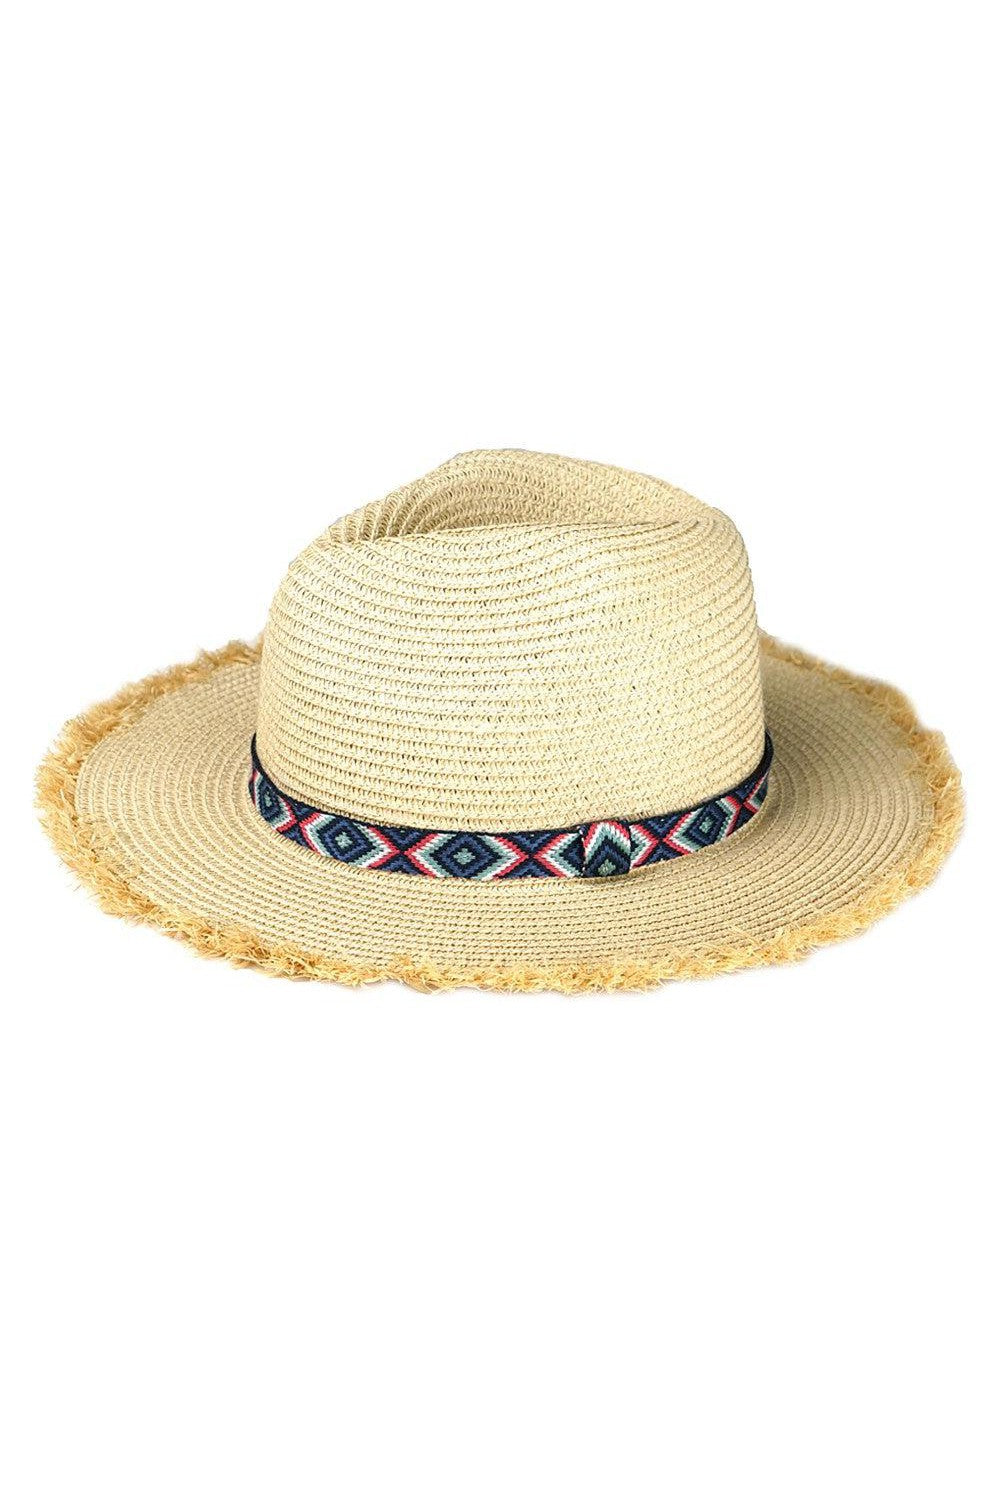 Shop Over My Head Straw Panama Hat-Summer Hat at Ruby Joy Boutique, a Women's Clothing Store in Pickerington, Ohio